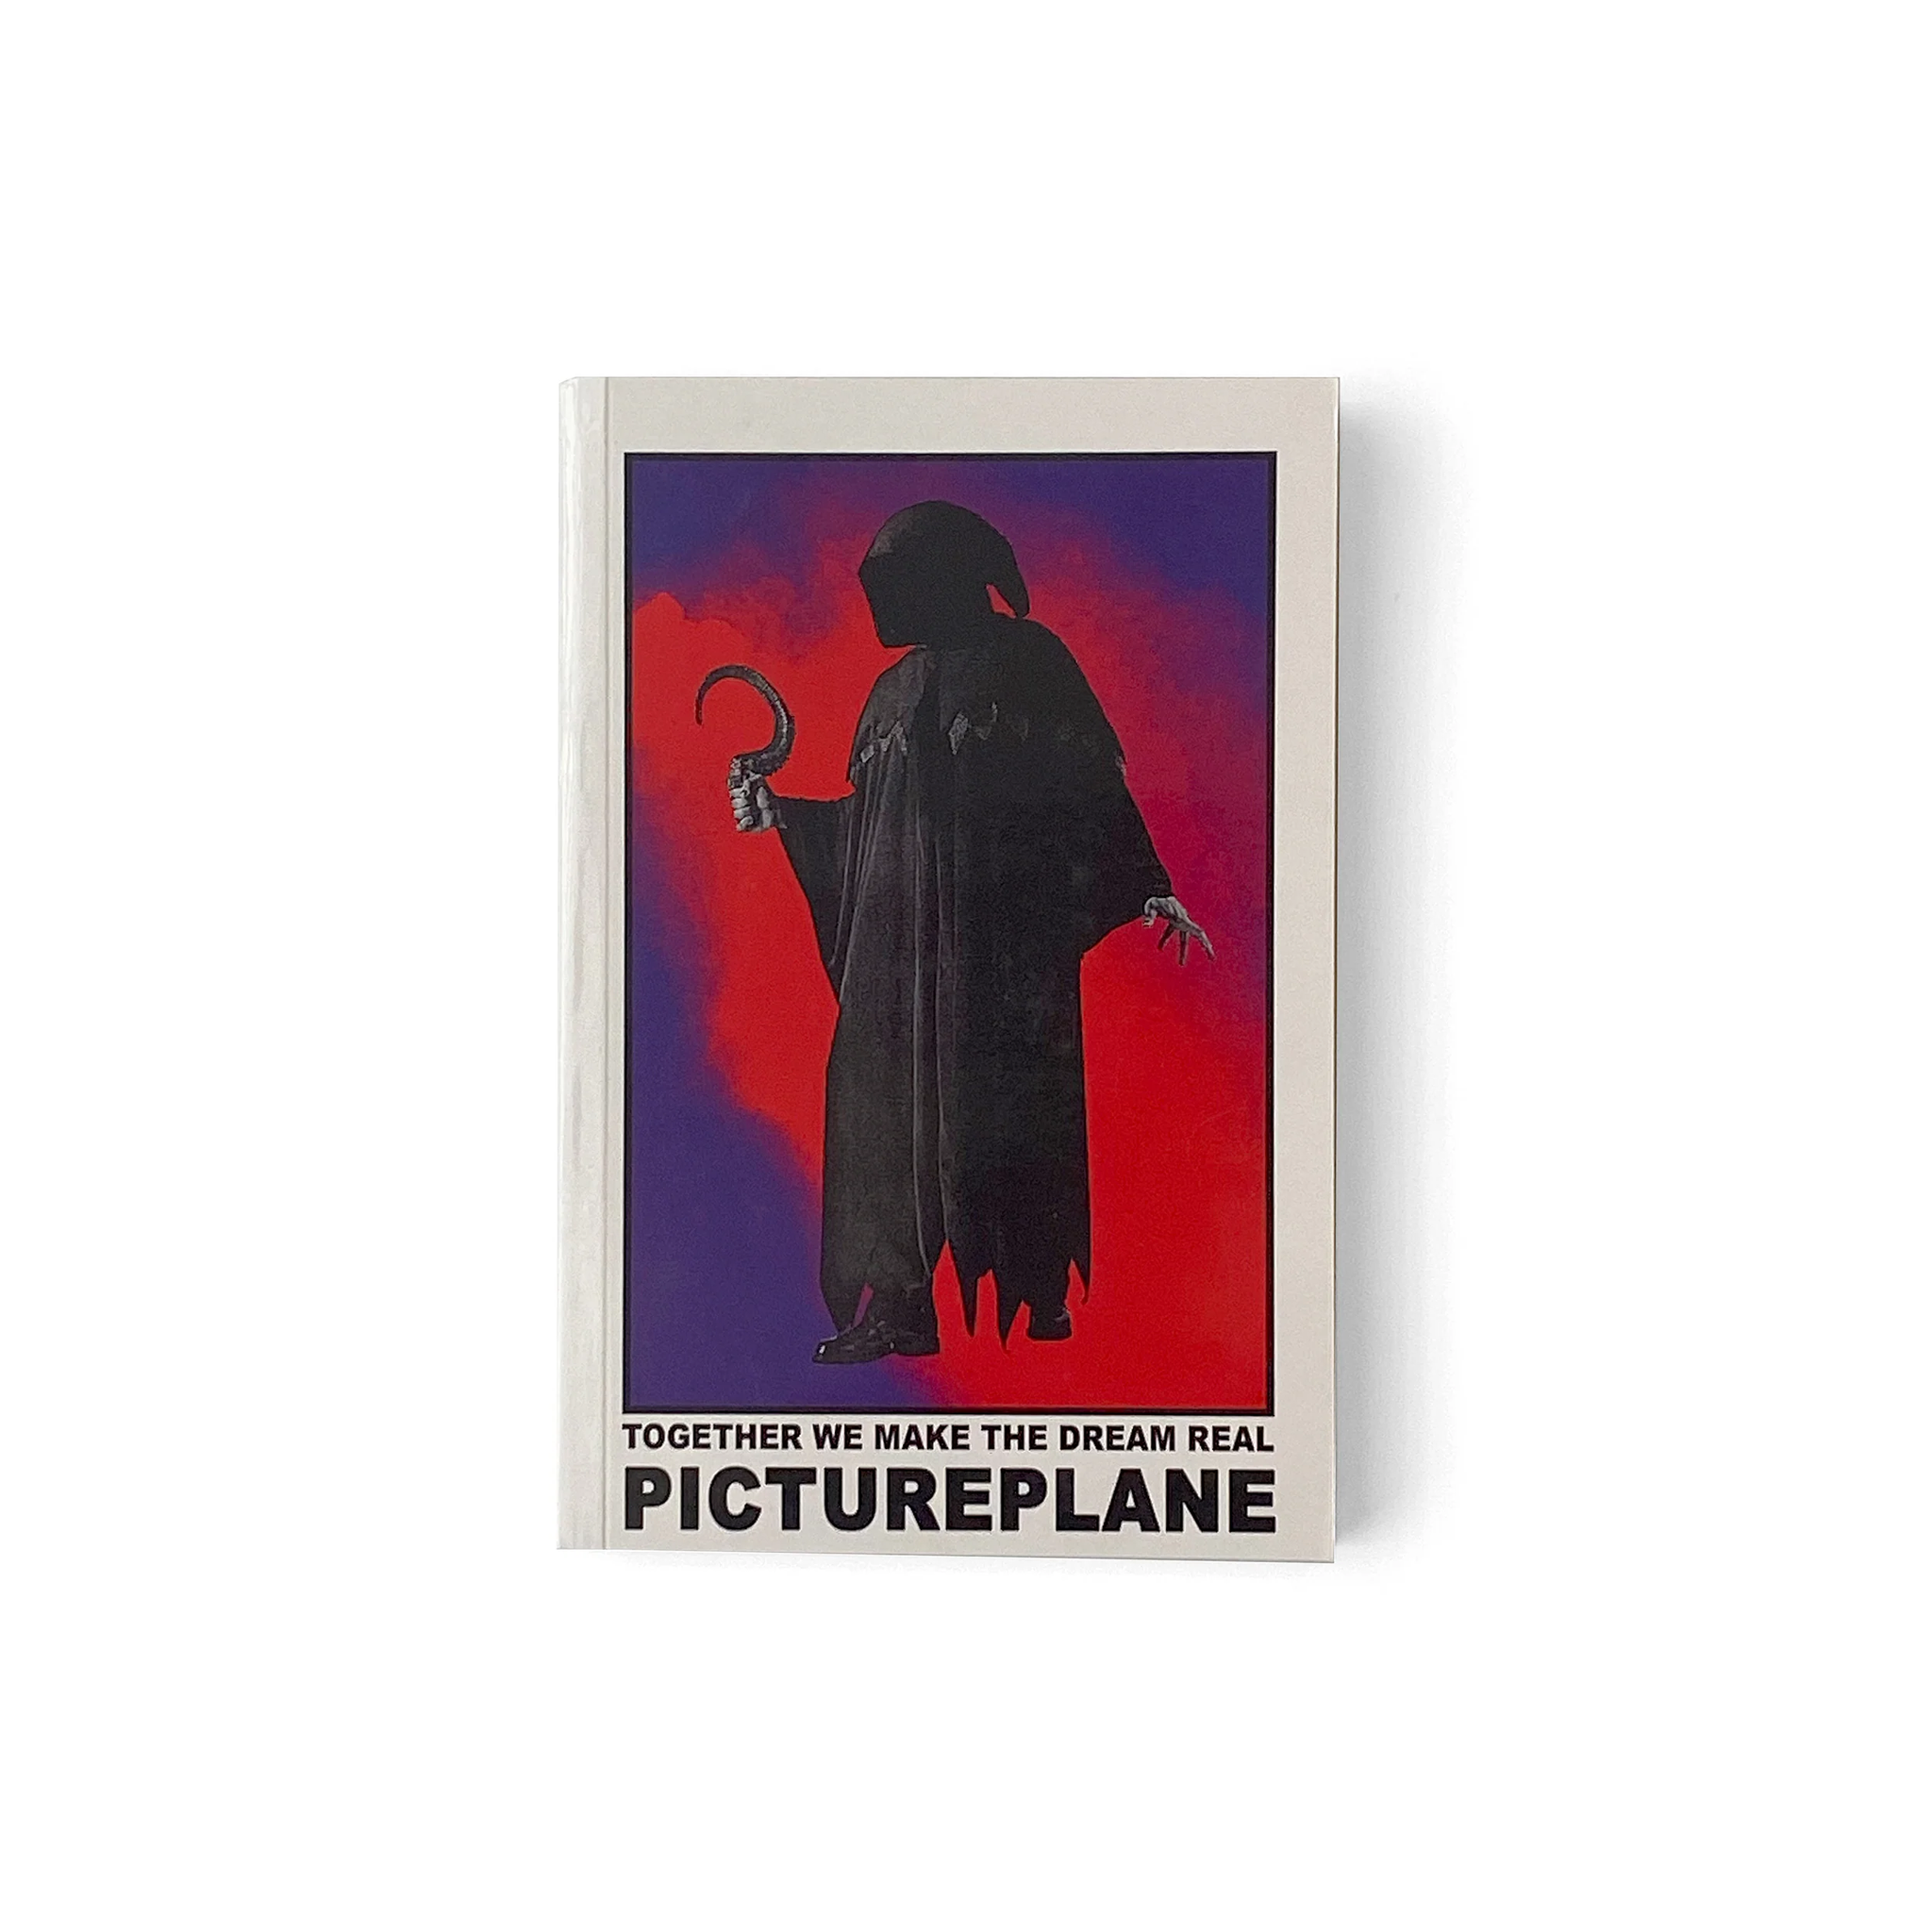 Pictureplane - Together We Make The Dream Real